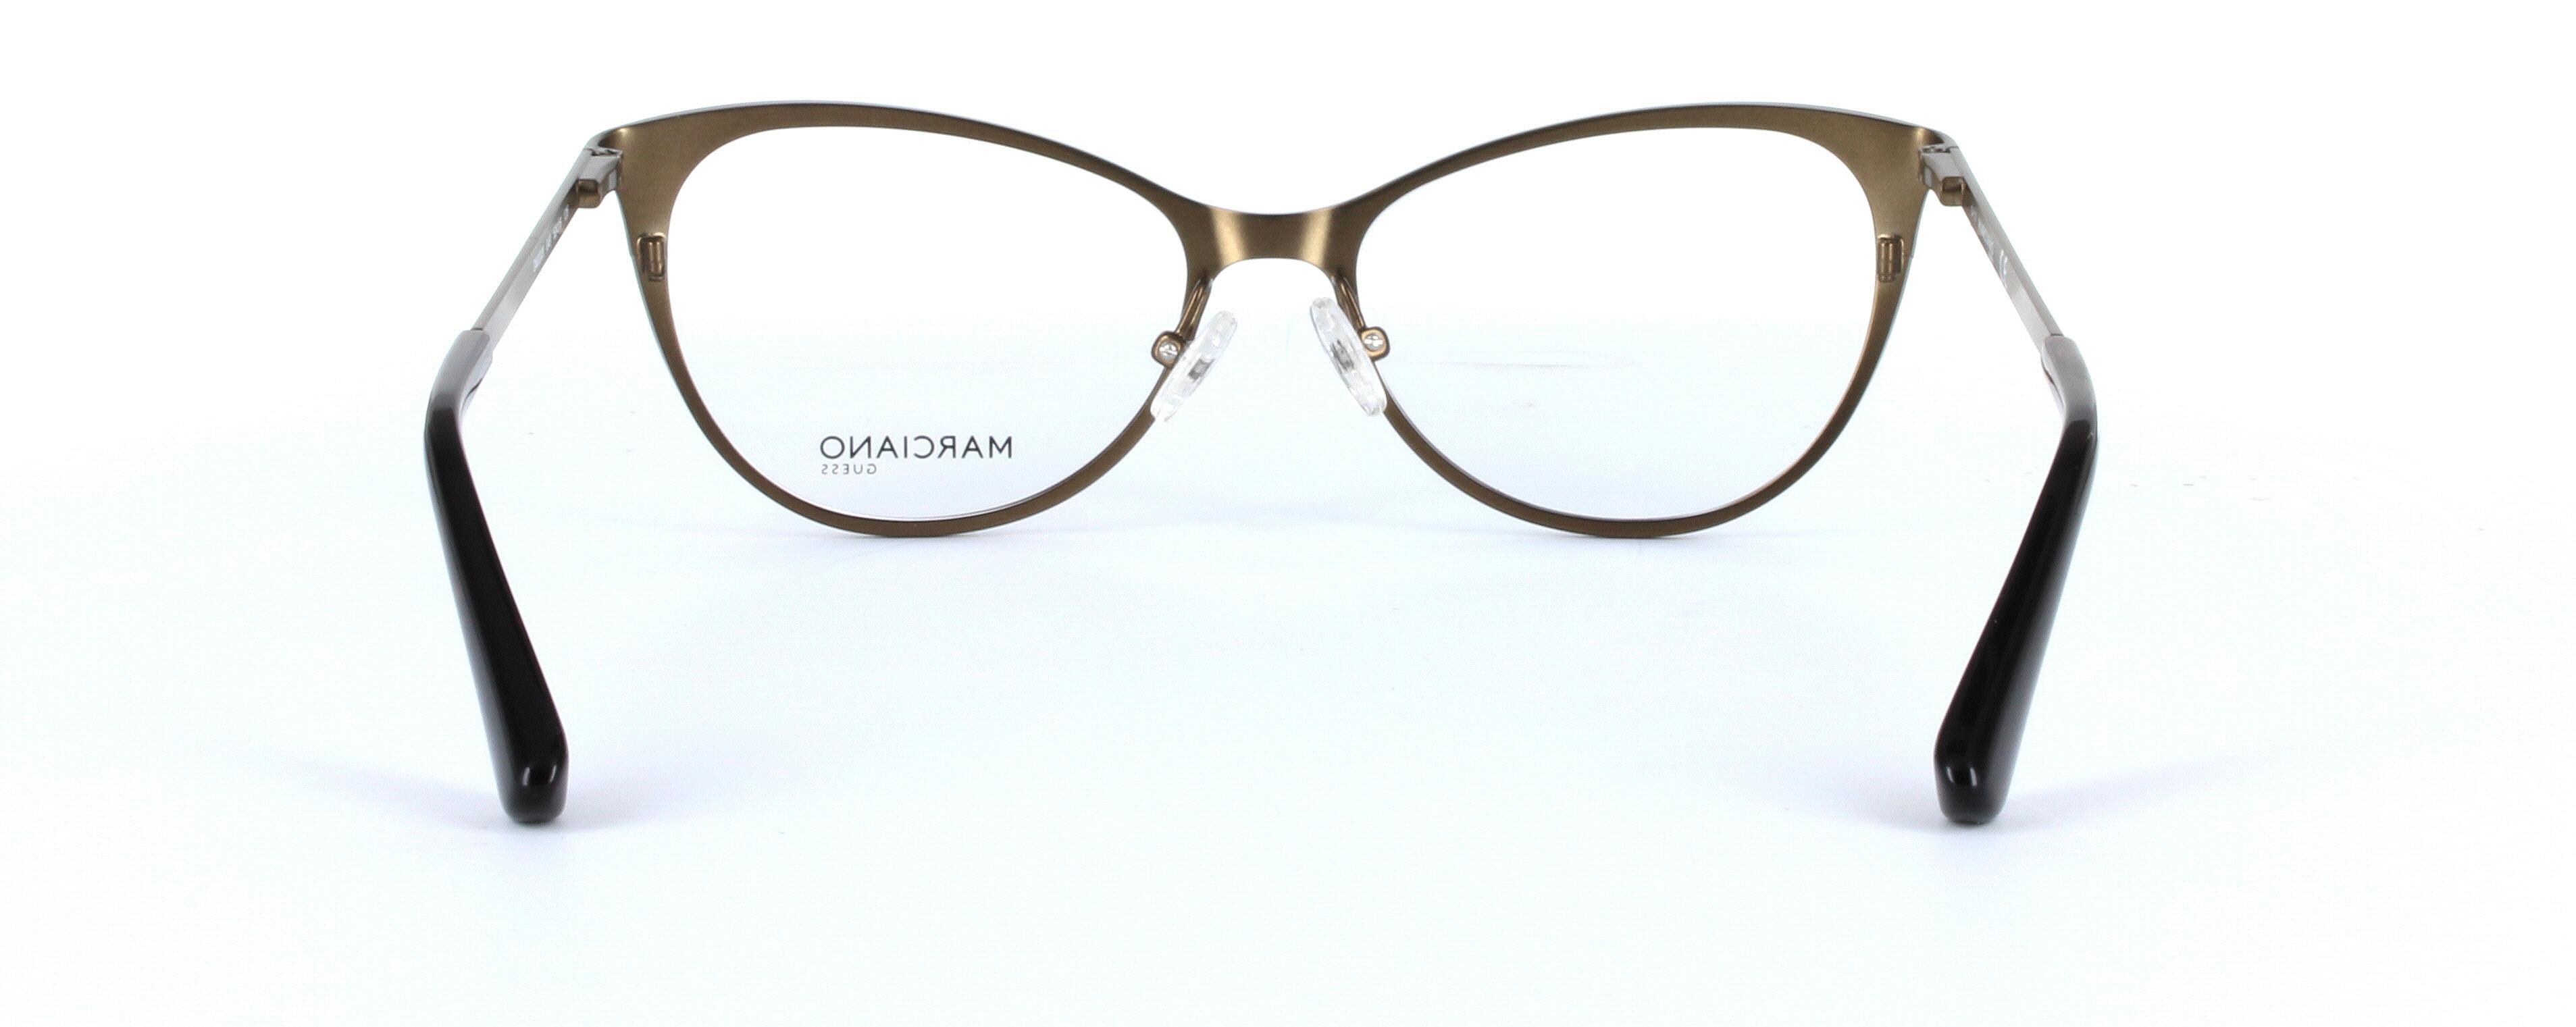 GUESS MARCIANO (GM0309-049) Bronze Full Rim Oval Metal Glasses - Image View 3